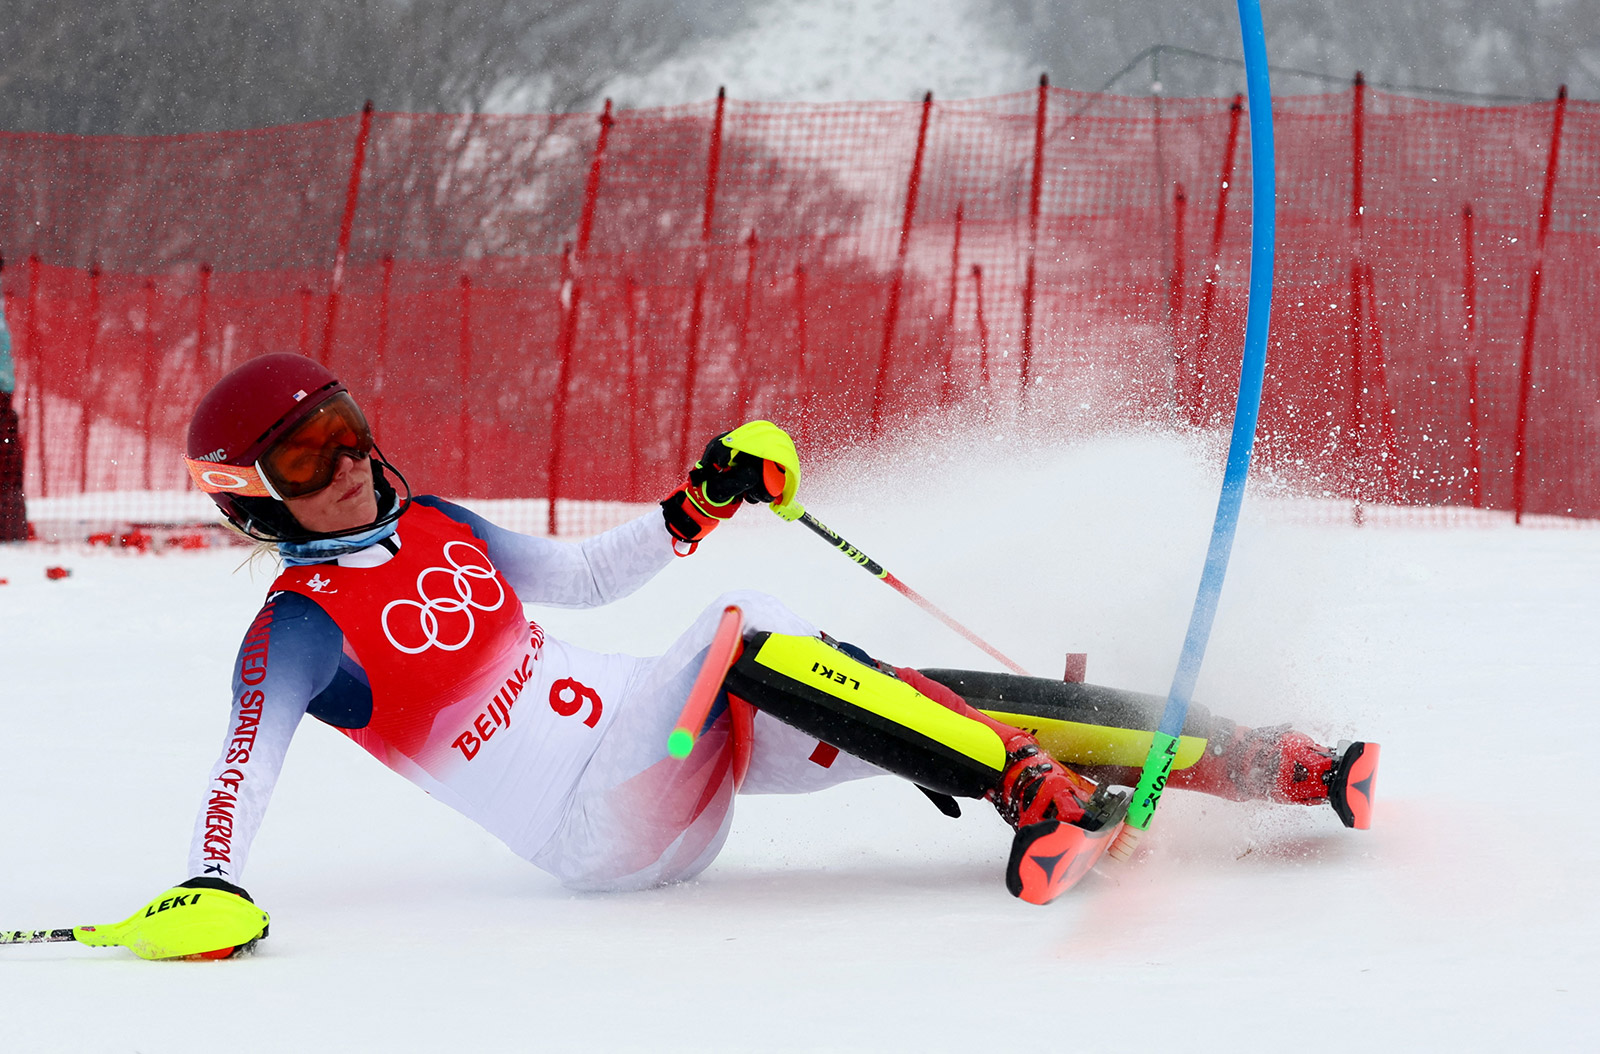 American skier Mikaela Shiffrin falls during her run in the slalom portion of the combined event on Thursday.